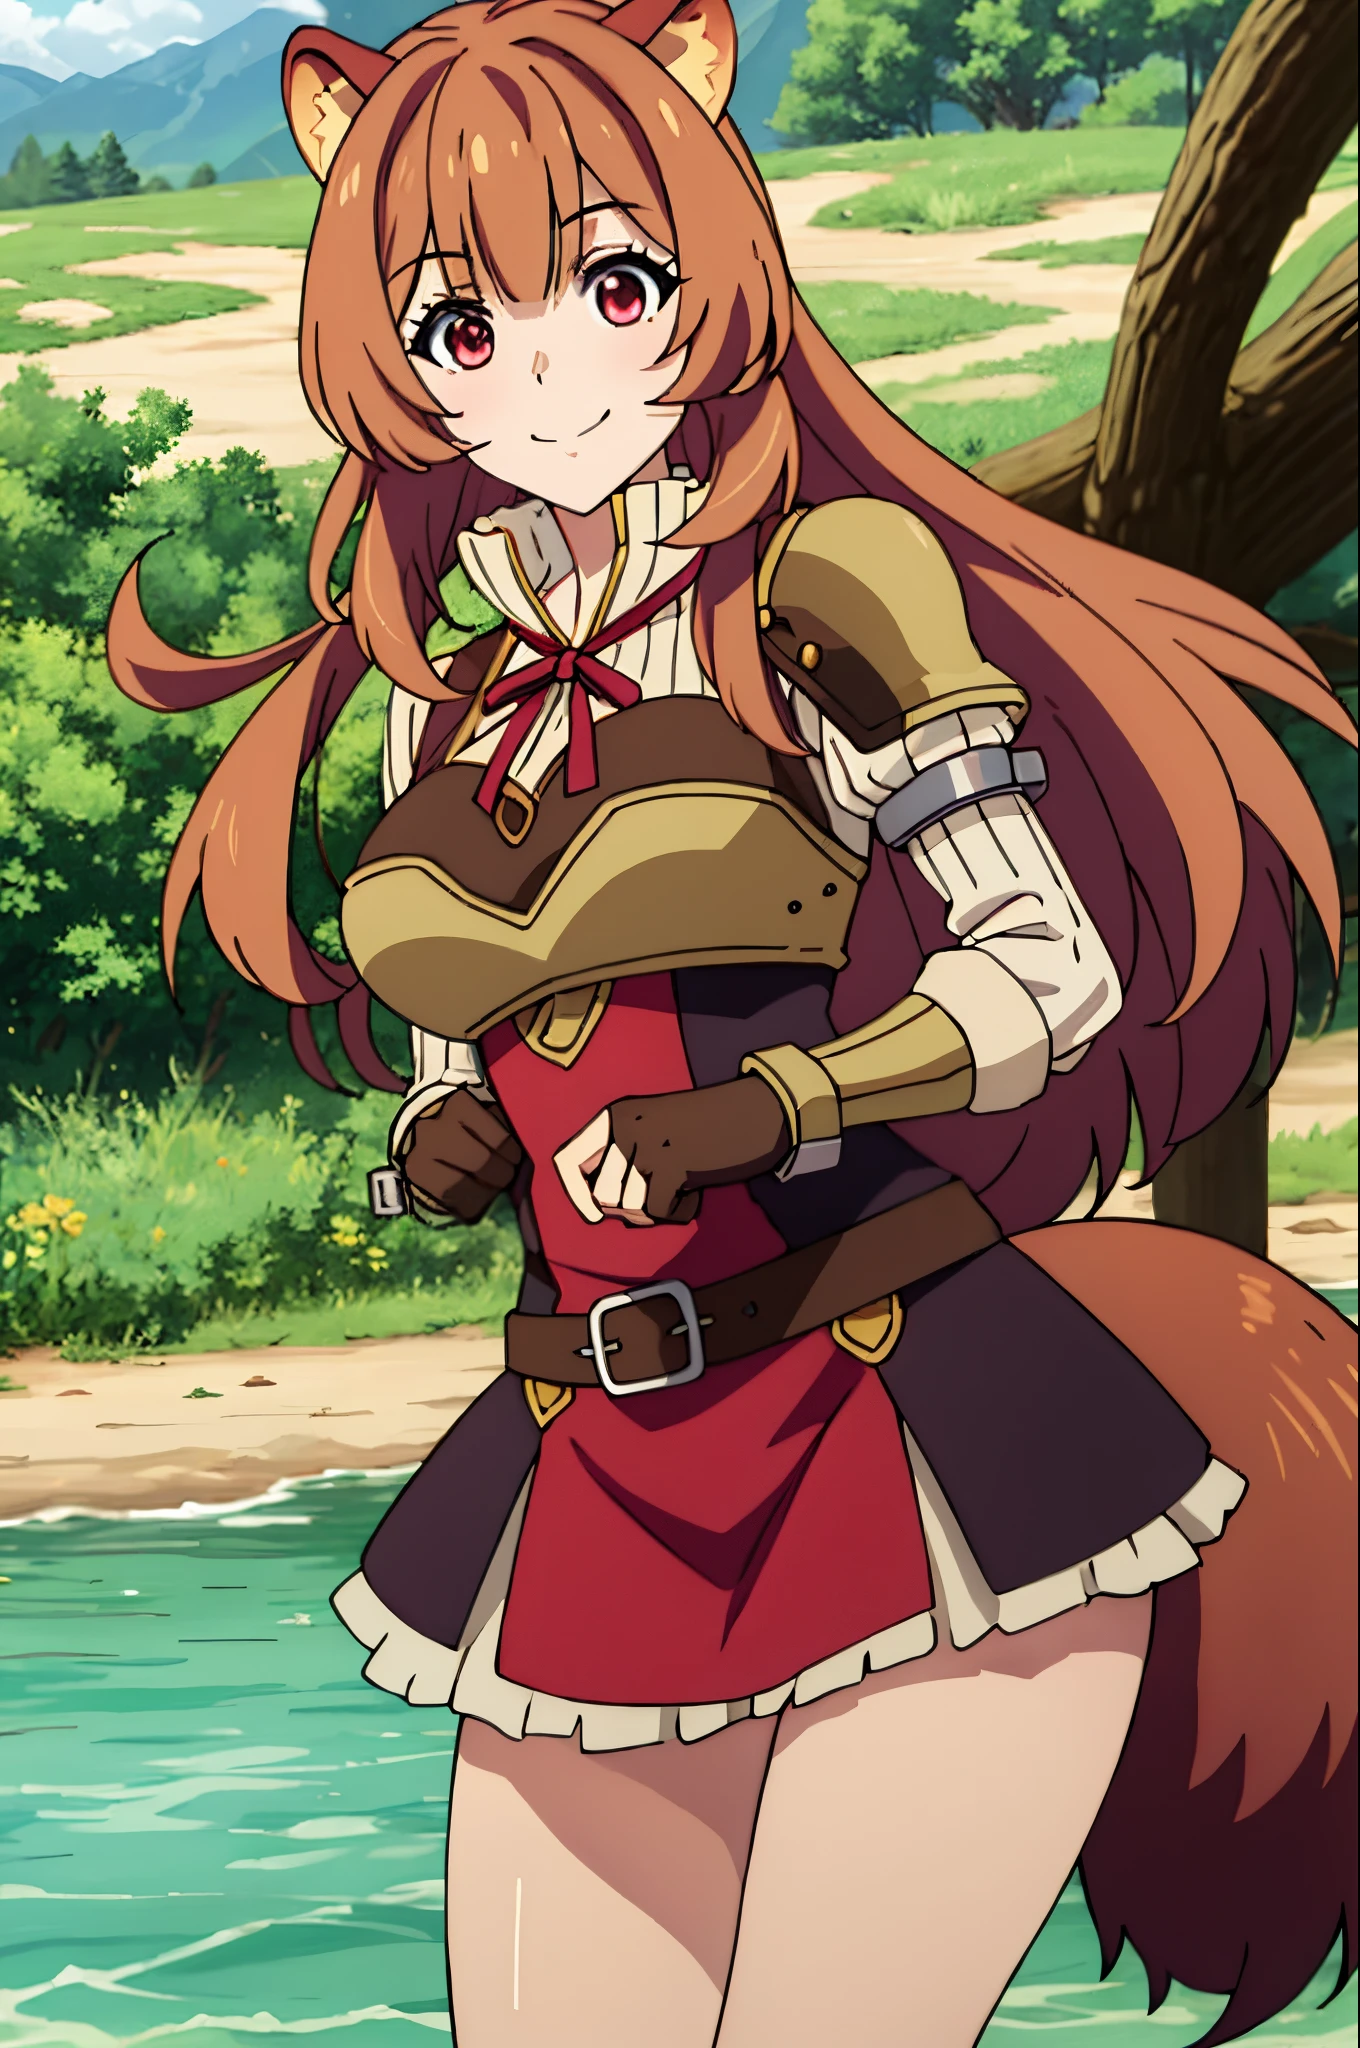 Longhaire、raccoon raccoon raccoon tail、Leather-brown hair、river armor、Red-eyed woman、Whip thighs、One woman、large full breasts、A slight smil、pays、Best Quality